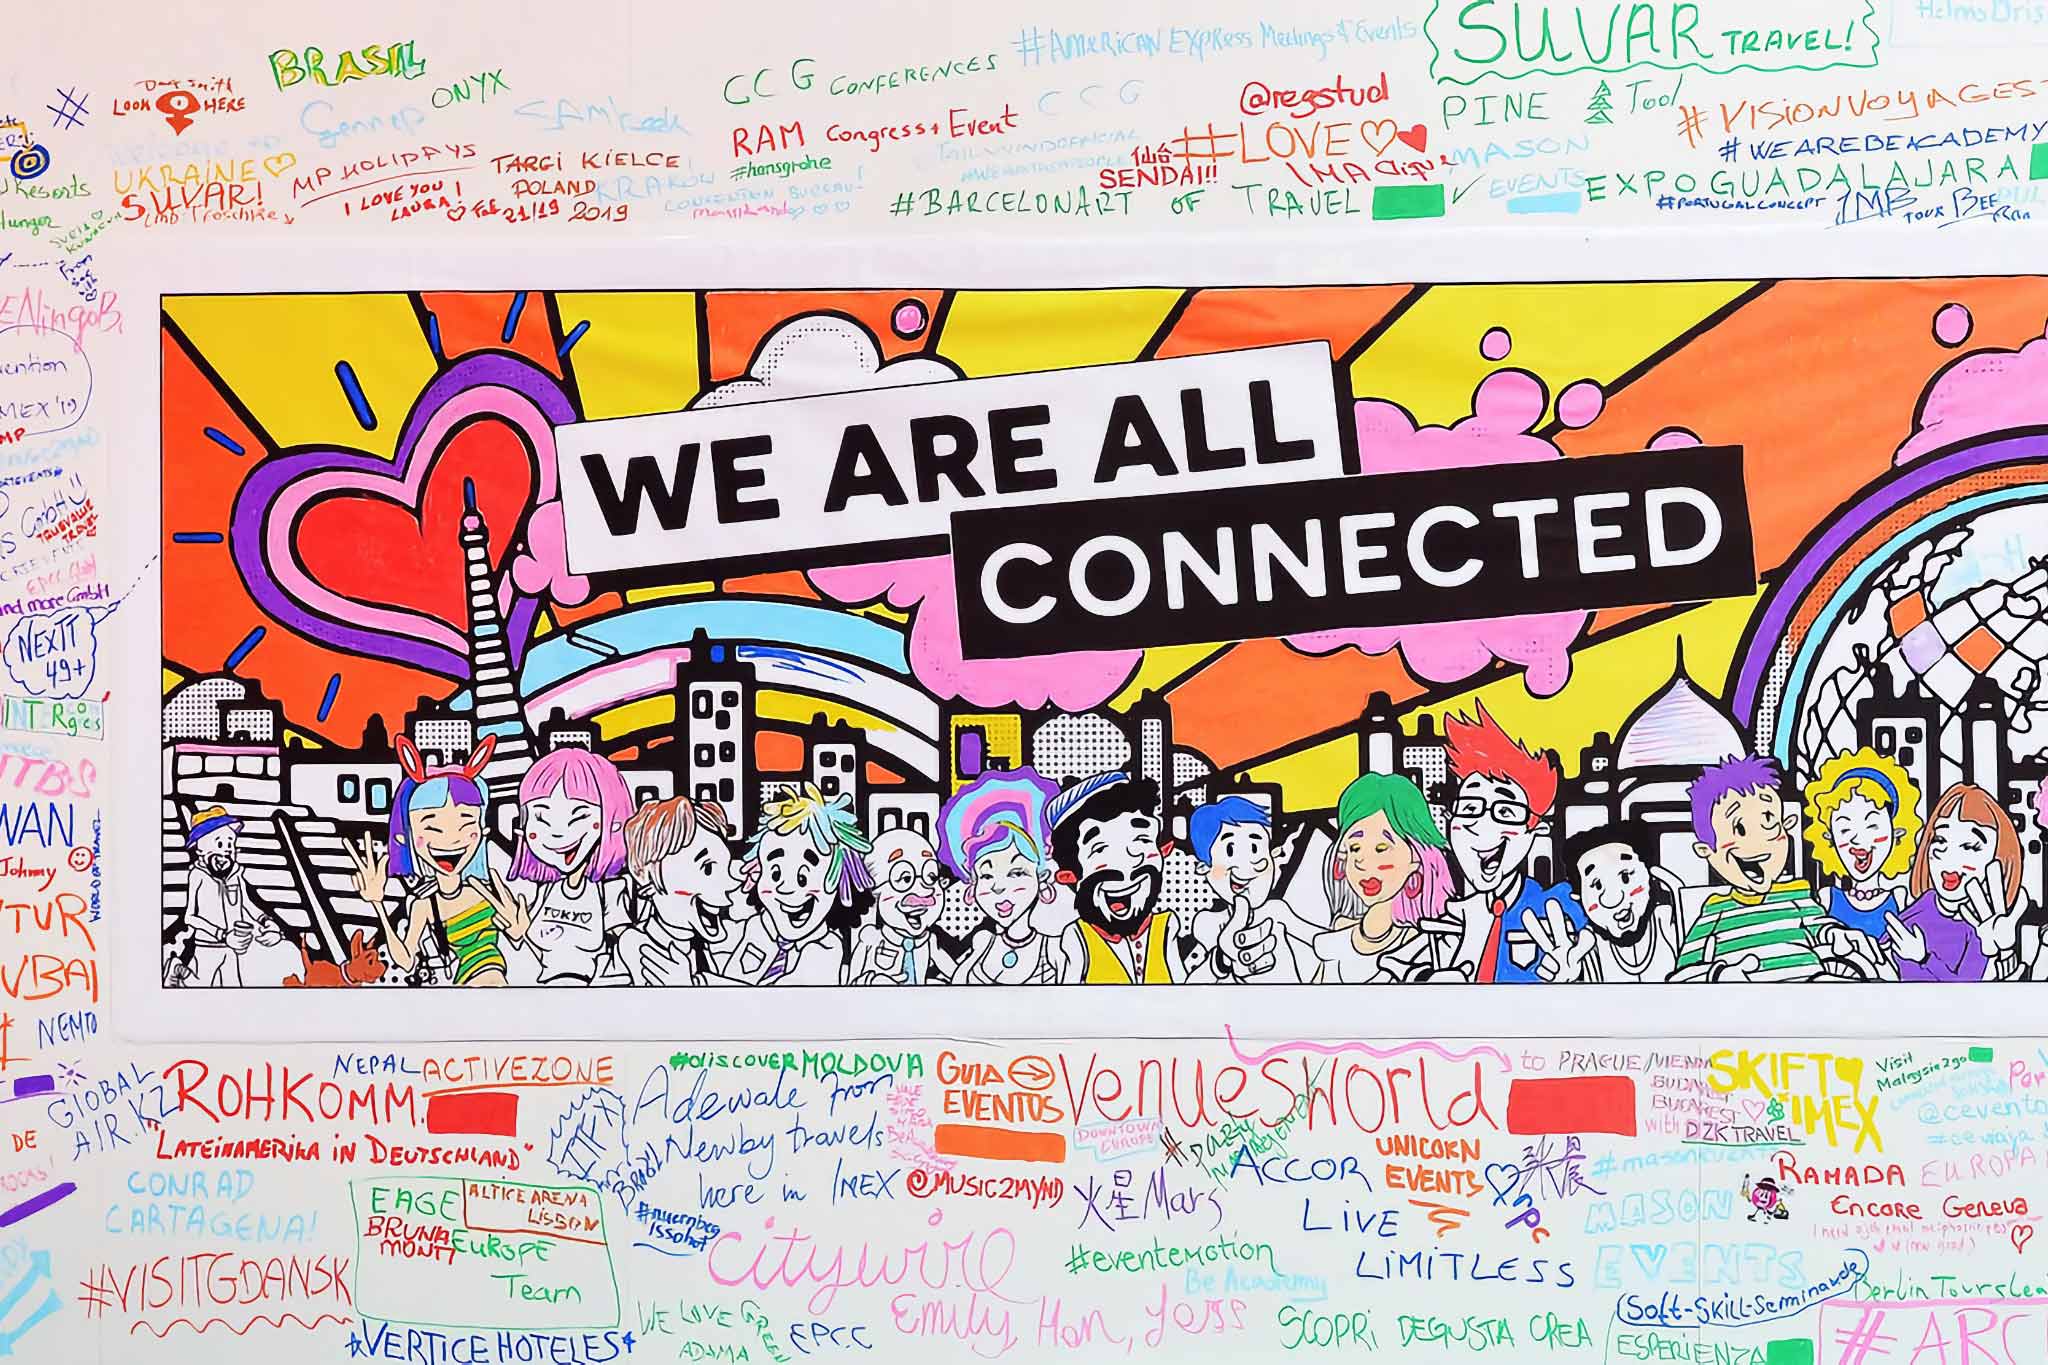 Imex America “We are all connected” mural